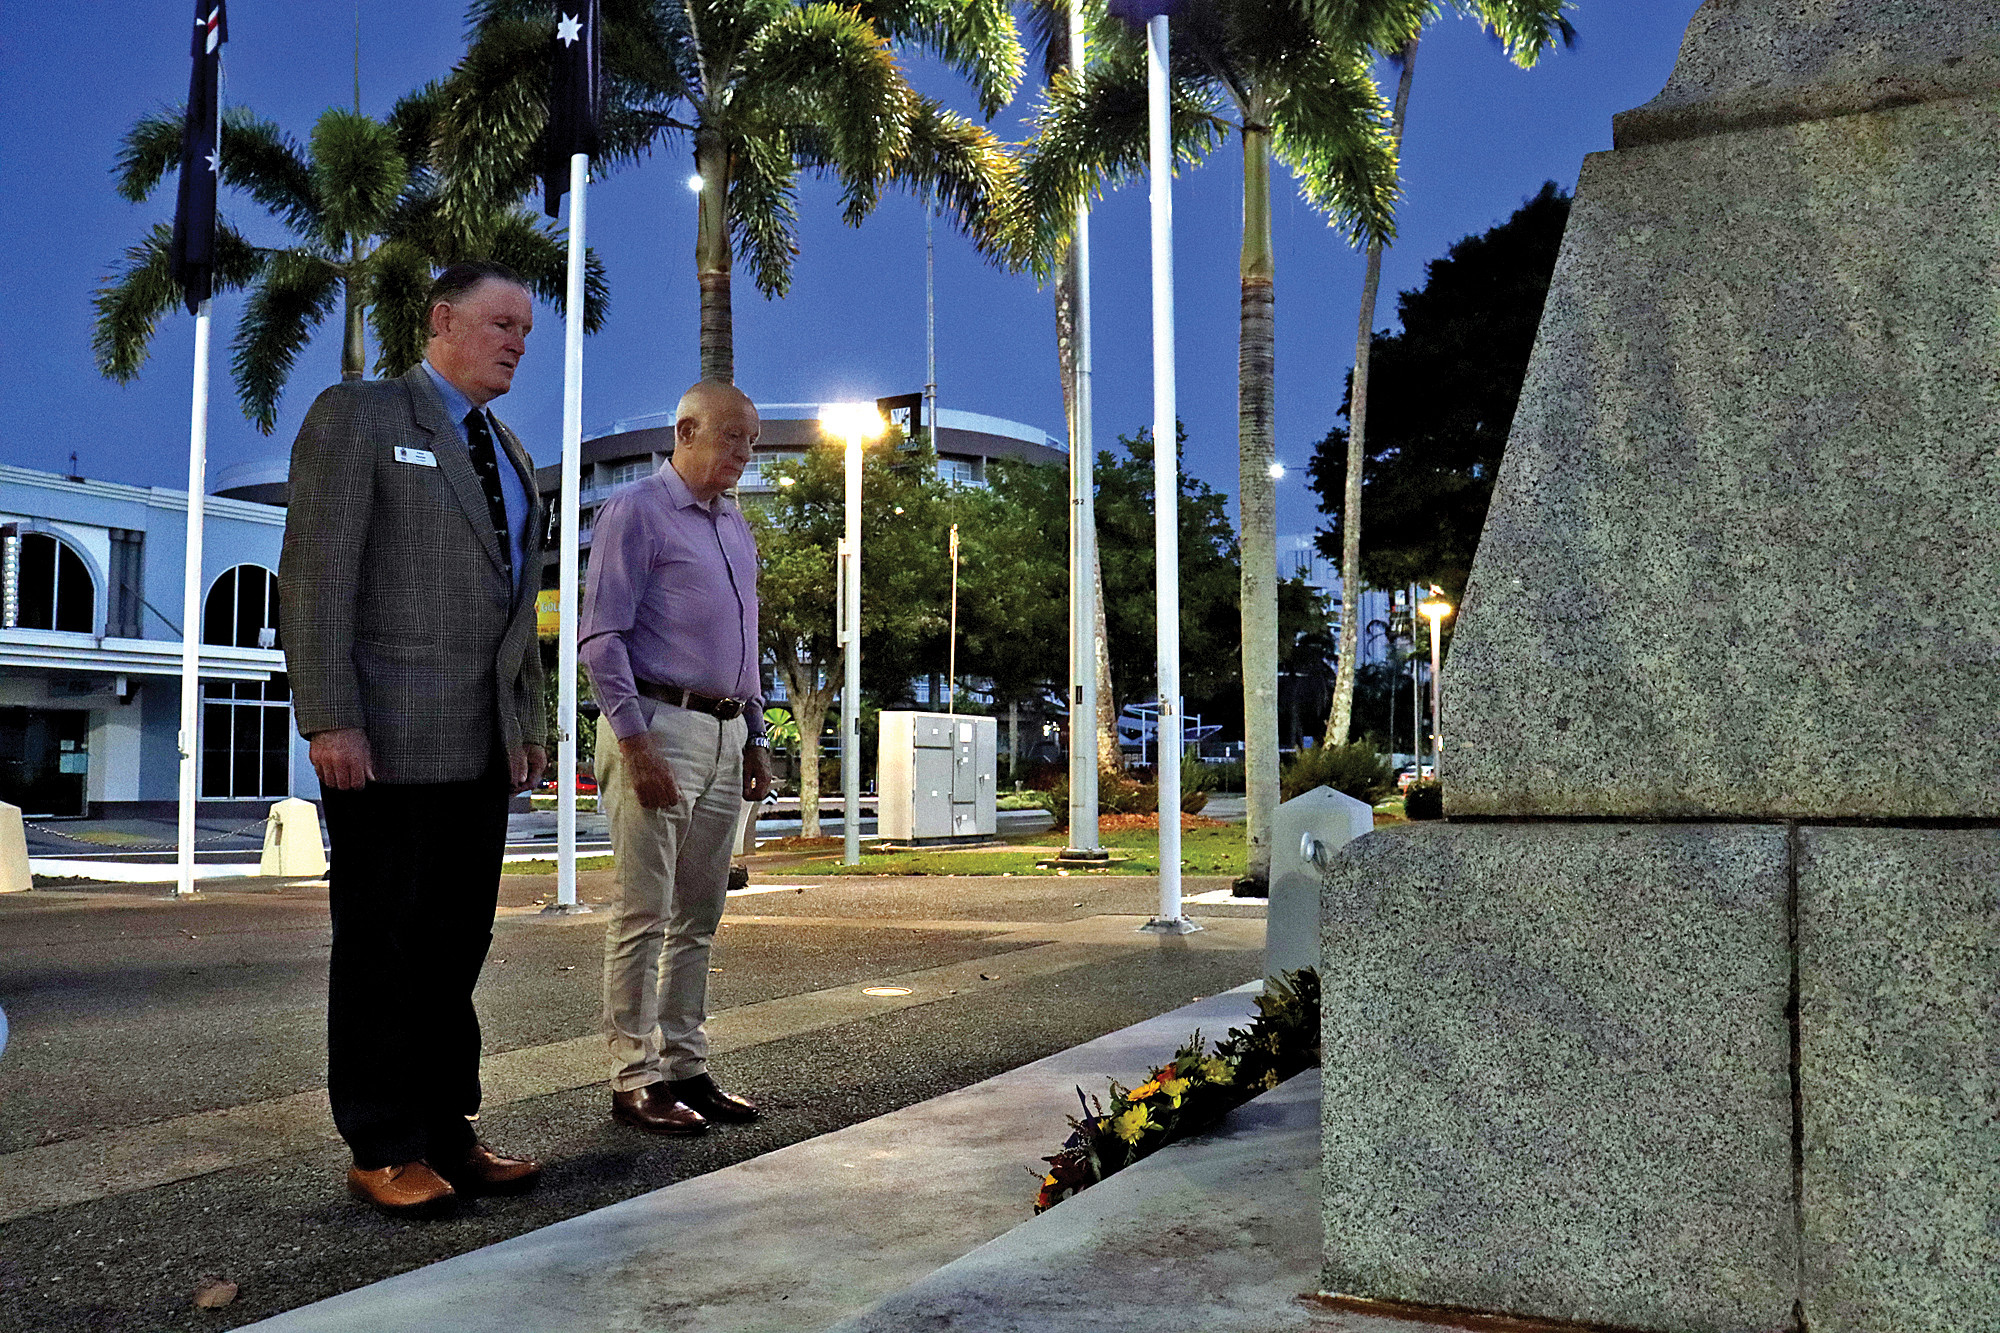 Cairns Mayor Bob Manning (right) joined Cairns RSL president Peter Hayton to lay a wreath at the Esplanade Cenotaph this morning to commemorate the 75th anniversary of Victory in the Pacific.